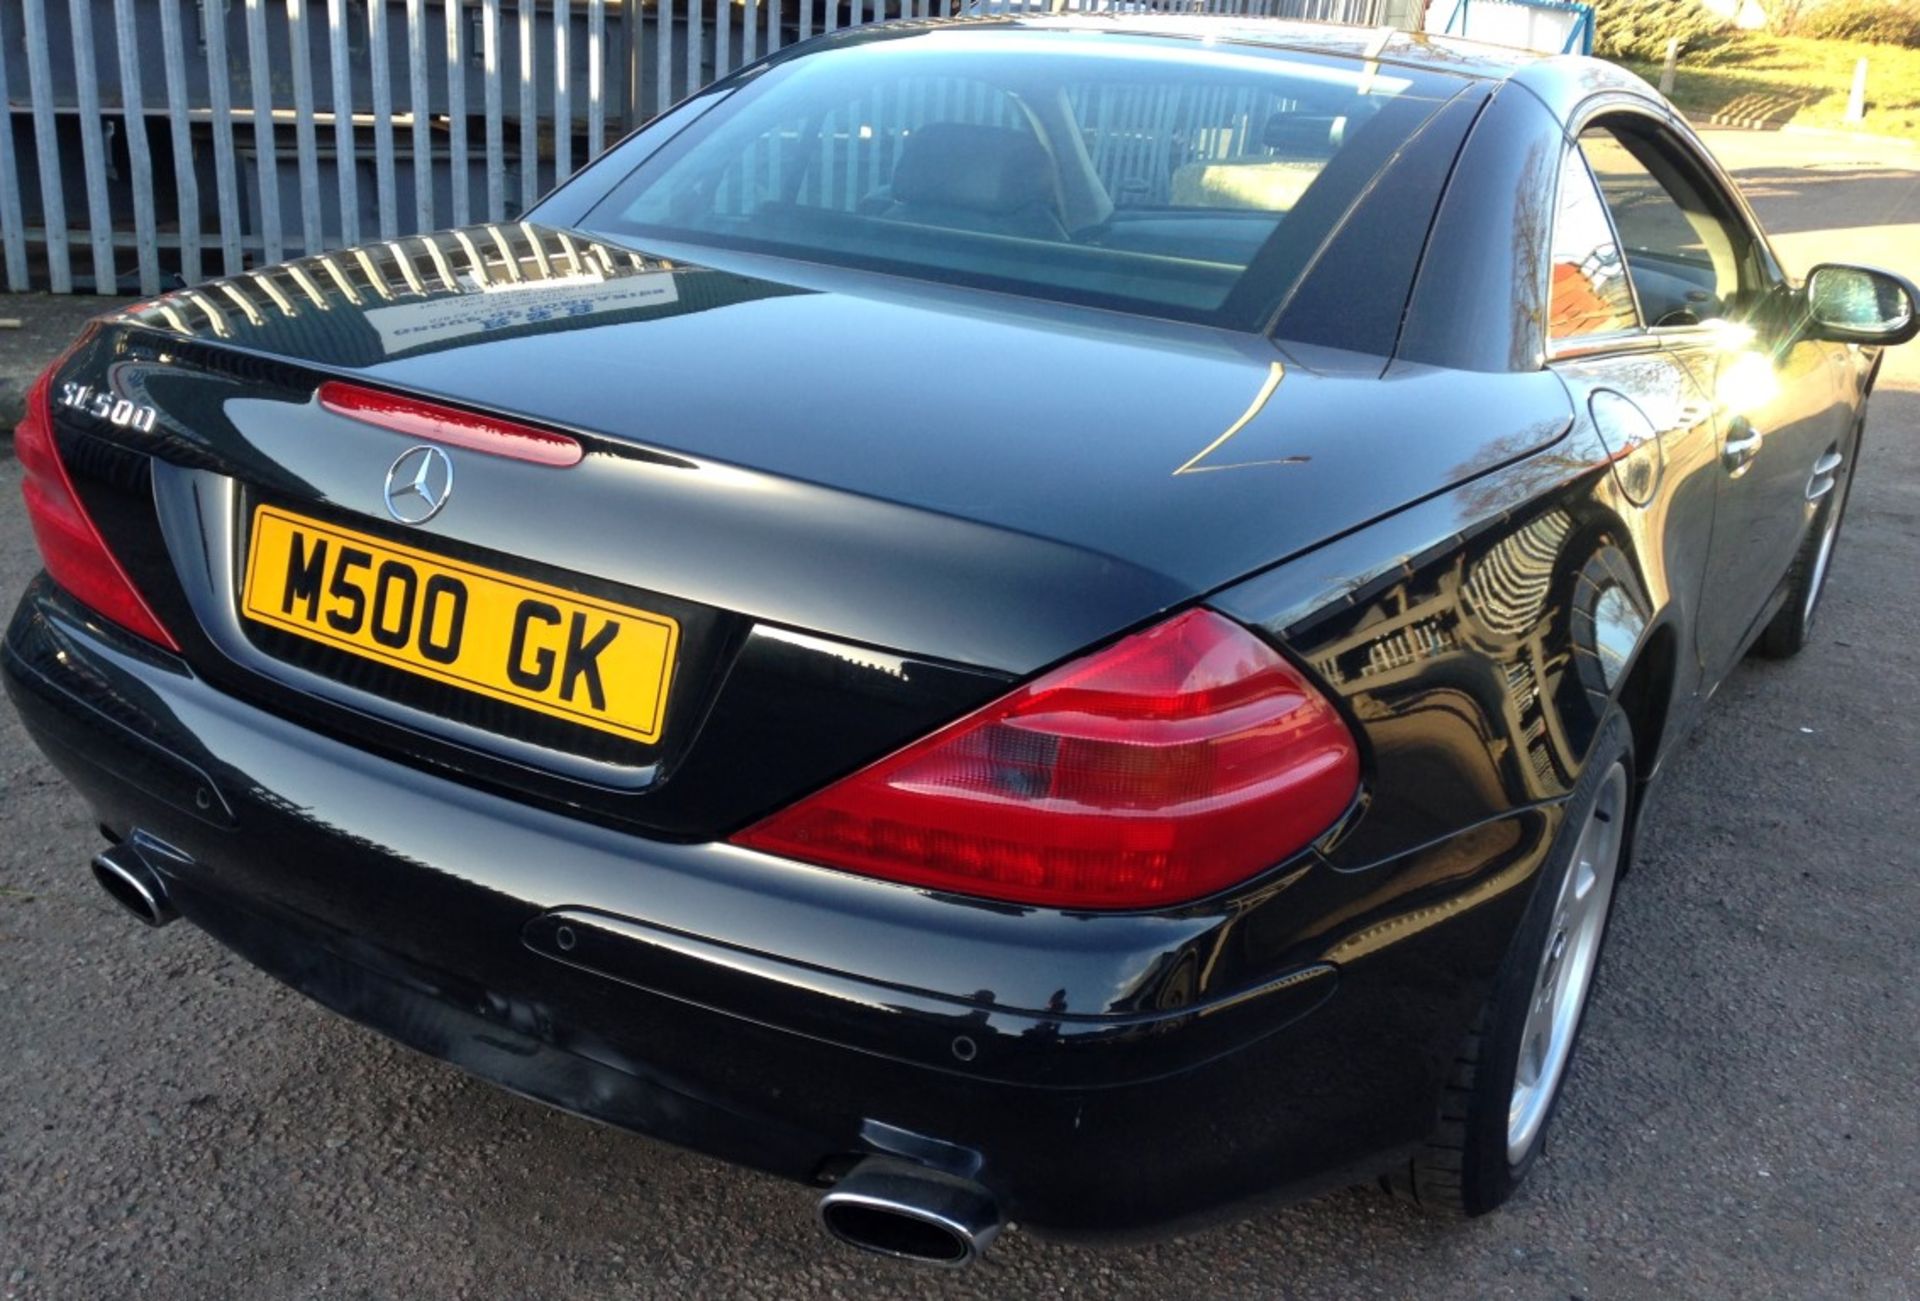 1 x Mercedes SL500 Automatic 5.0 Convertible - Petrol - Year 2002 - 94,500 Miles - Long MOT Expiry - Image 21 of 31